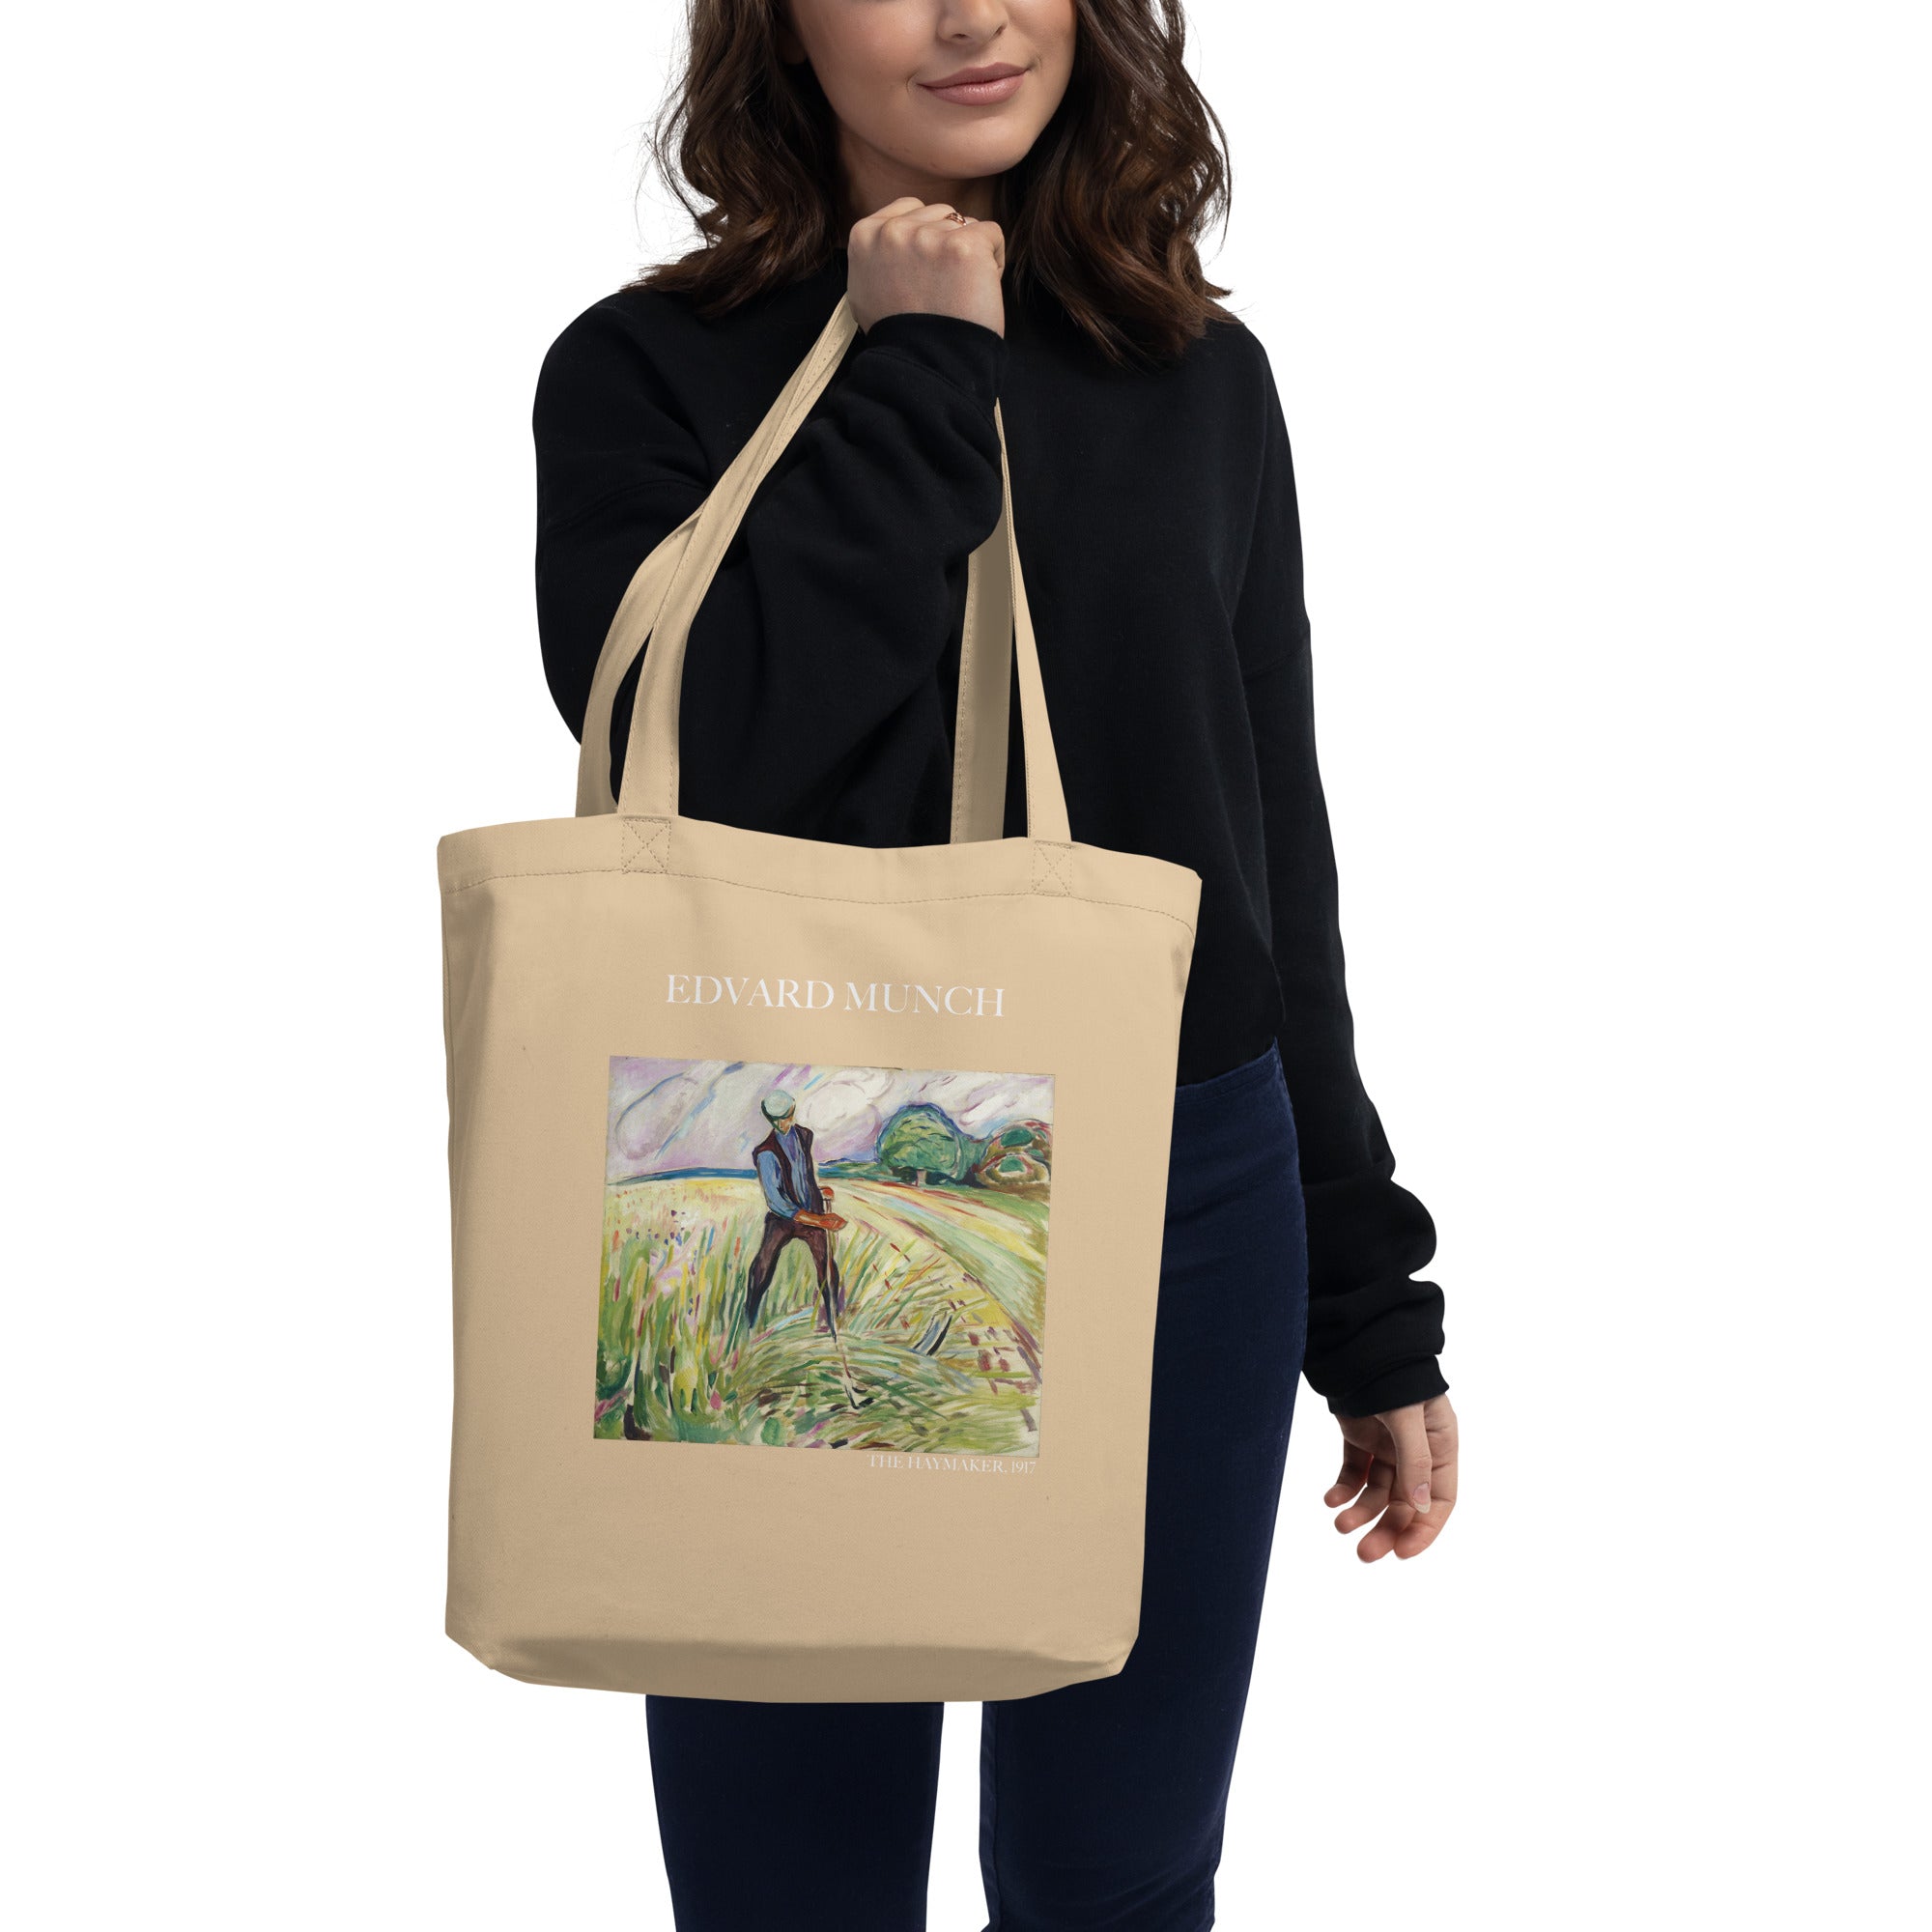 Edvard Munch 'The Haymaker' Famous Painting Totebag | Eco Friendly Art Tote Bag